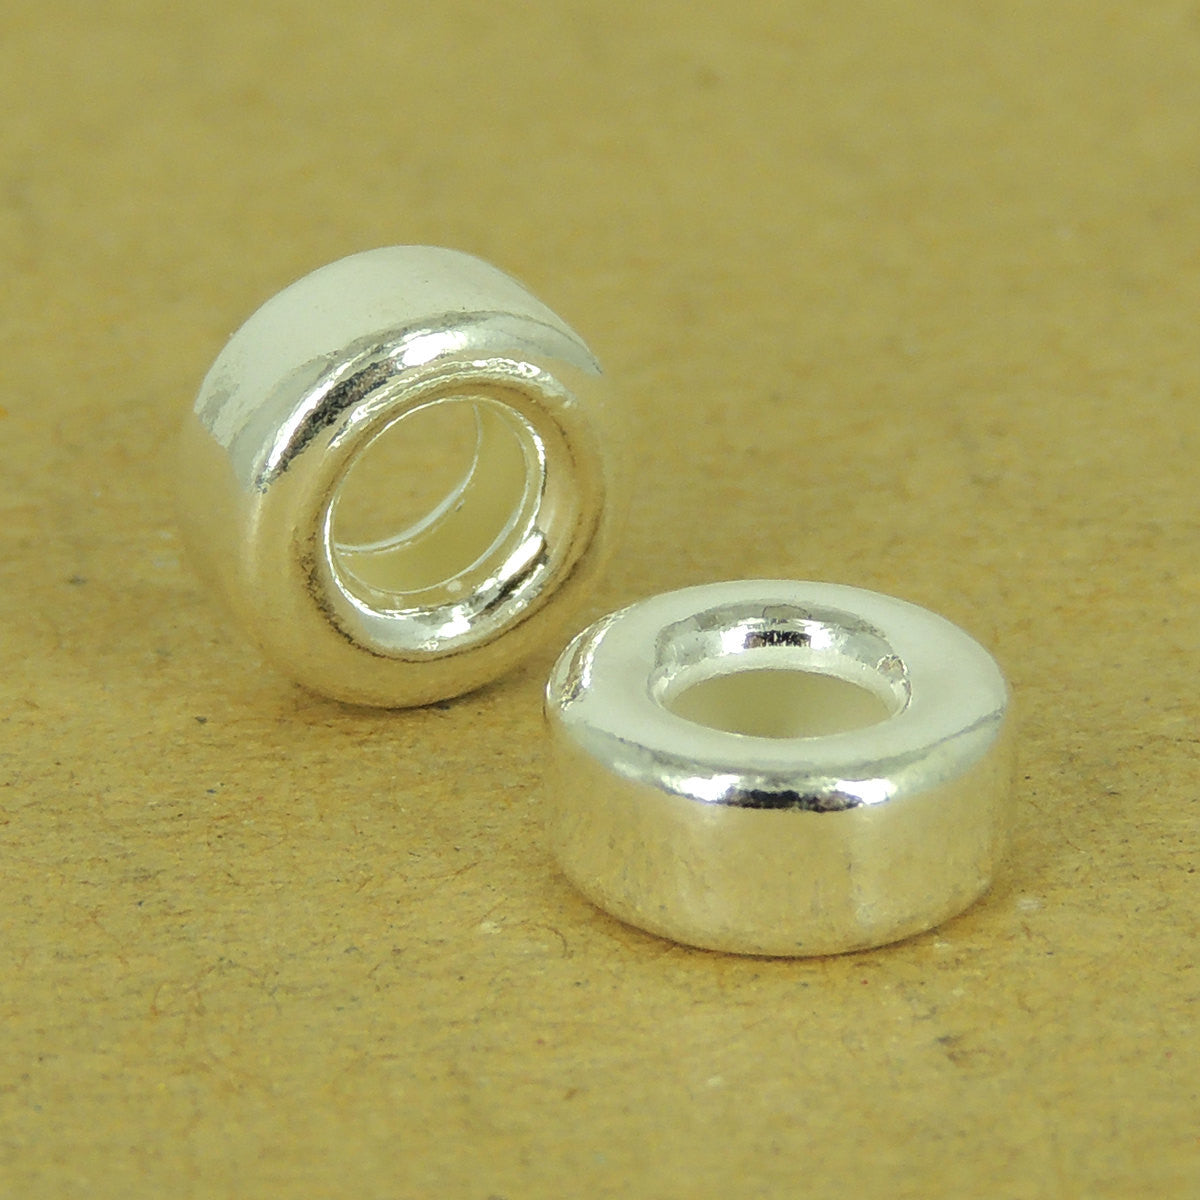 2 PCS Minimal Round Silver Spacers - S925 Sterling Silver WSP532X2